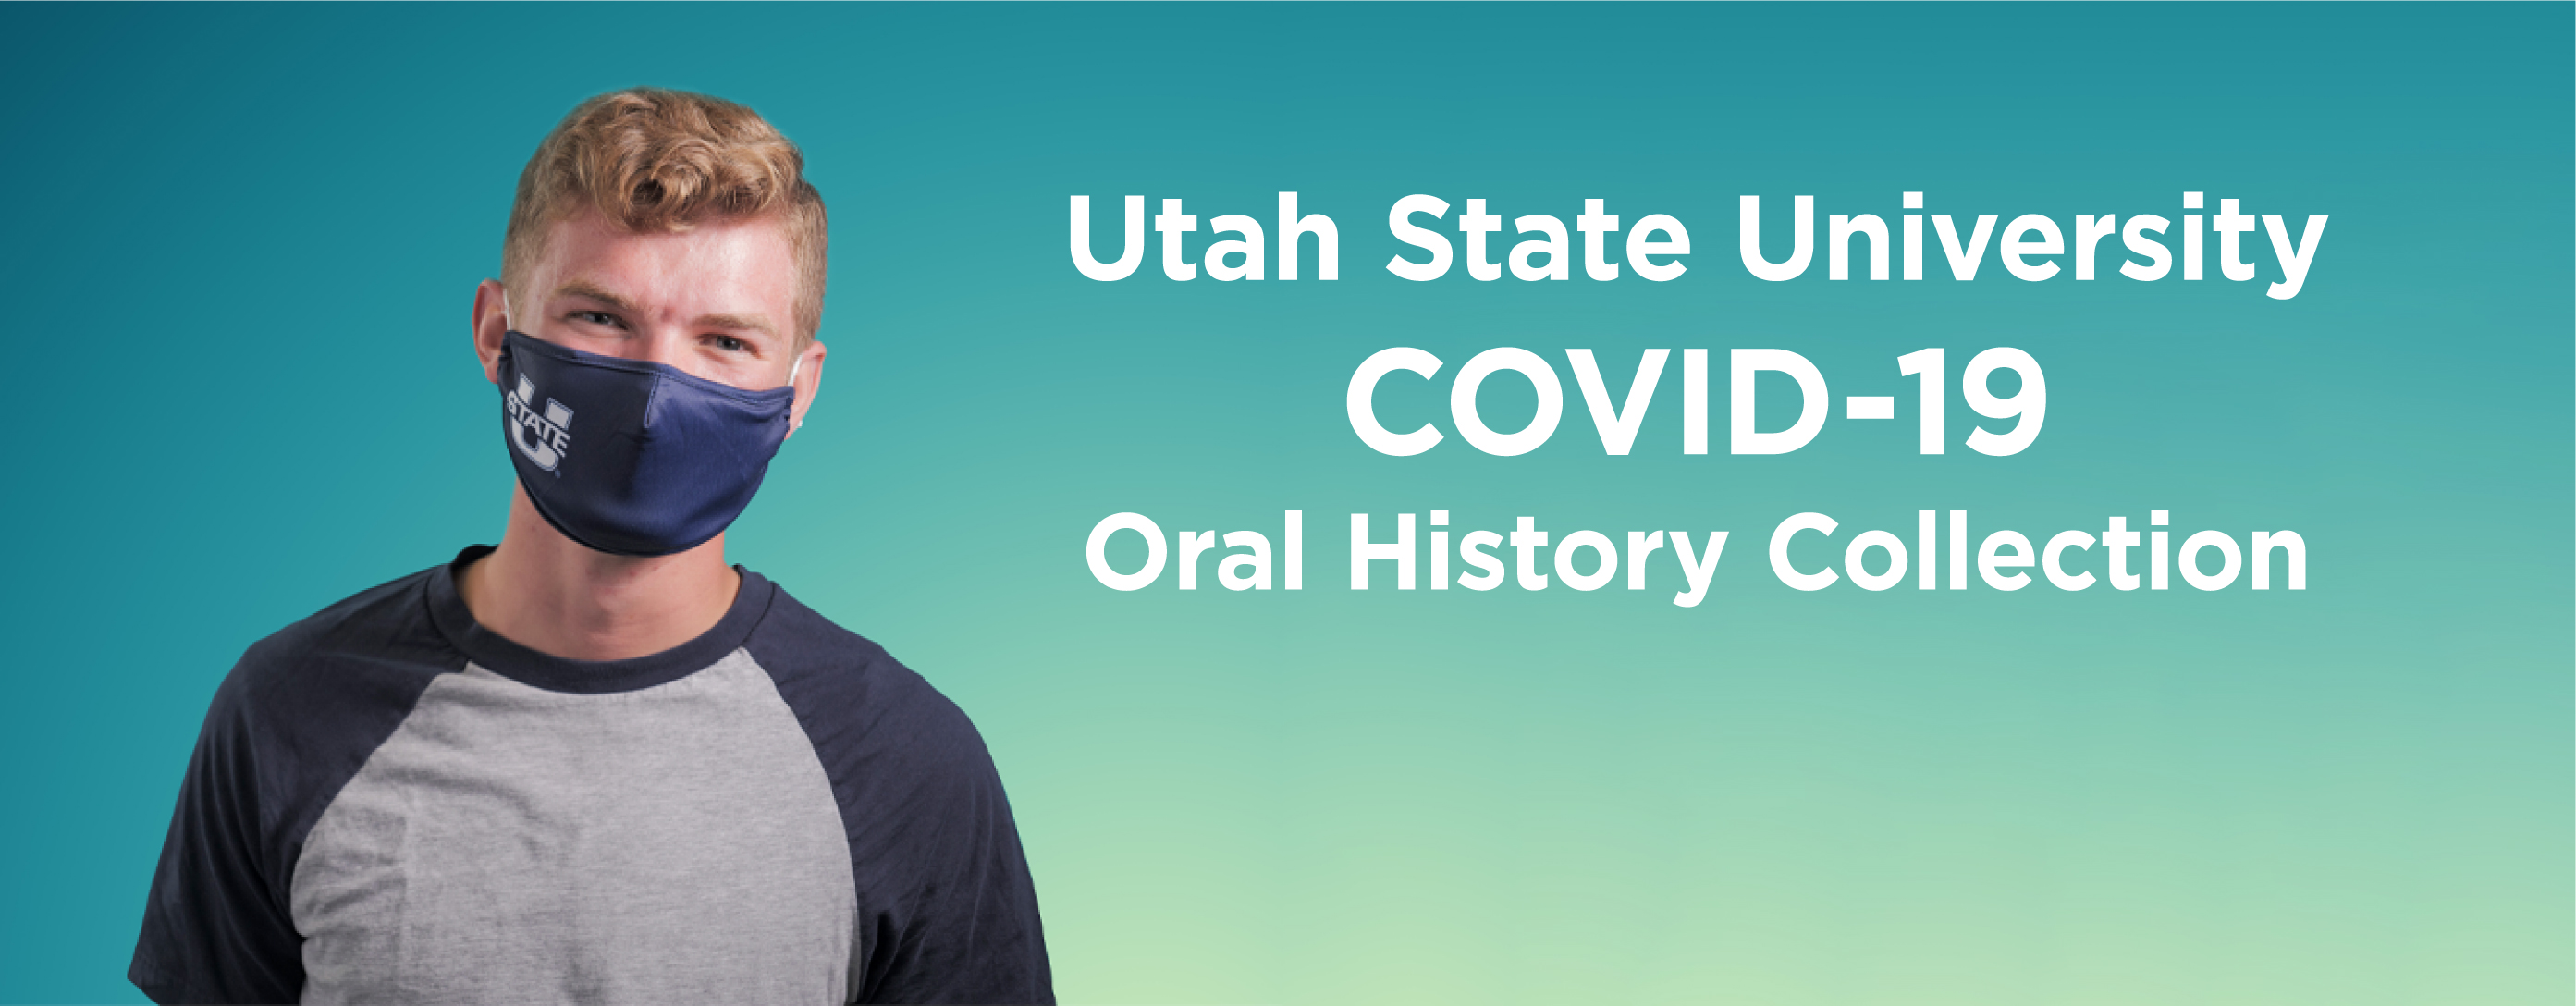 Utah State University COVID-19 Oral History Collection